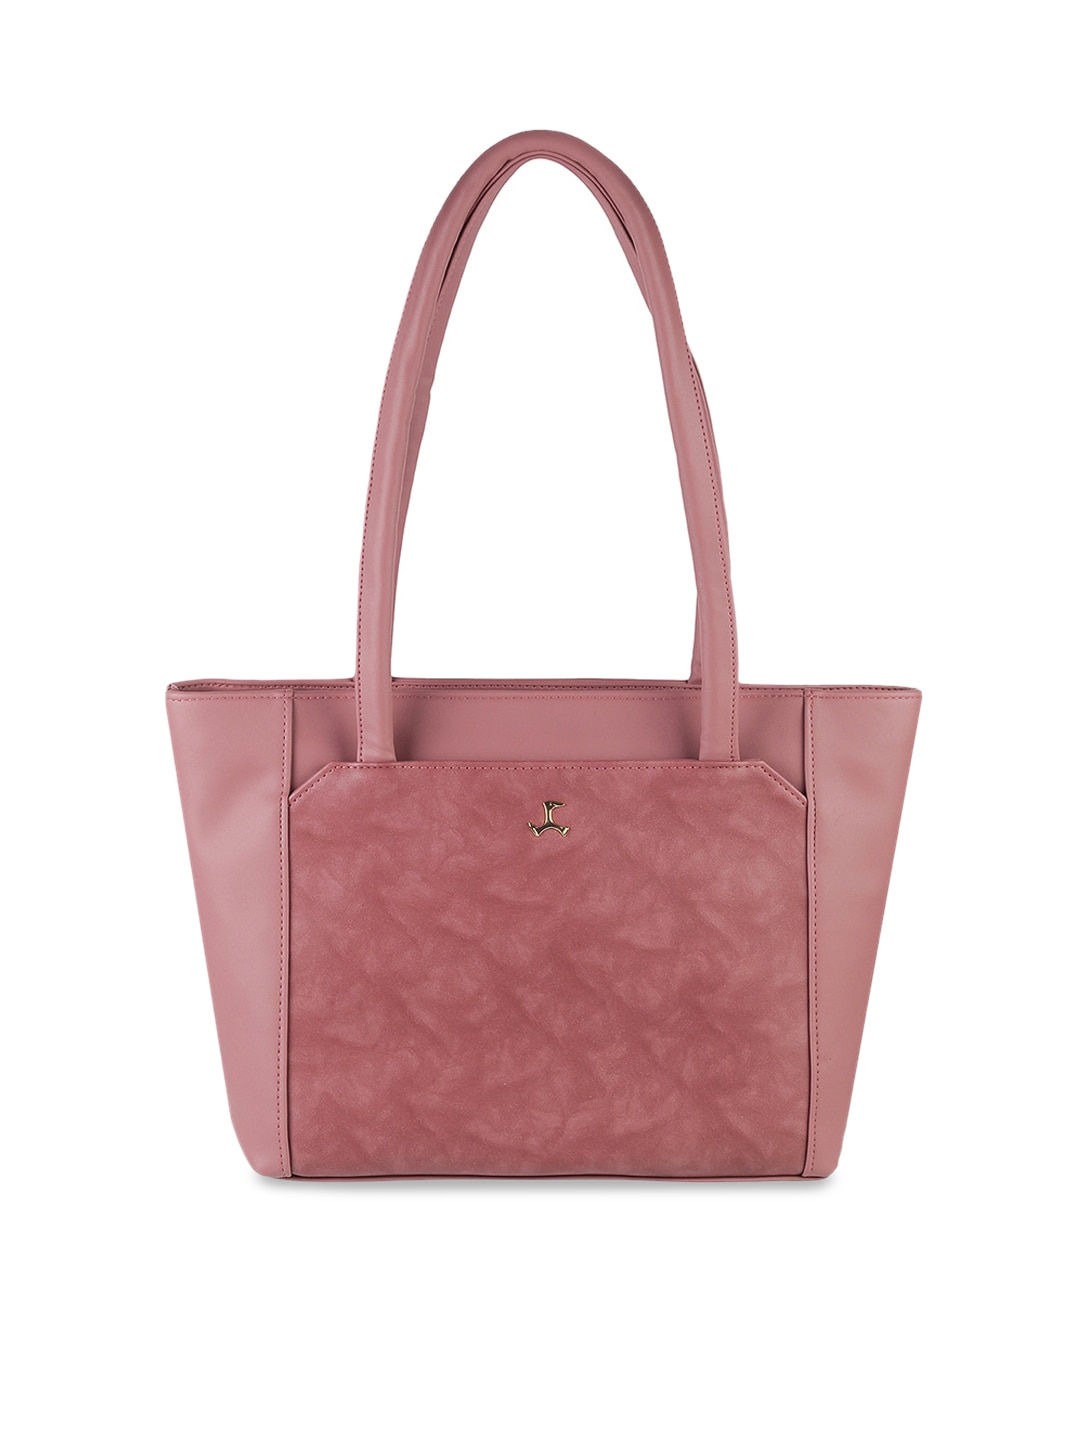 Mochi Pink Textured PU Structured Shoulder Bag Price in India